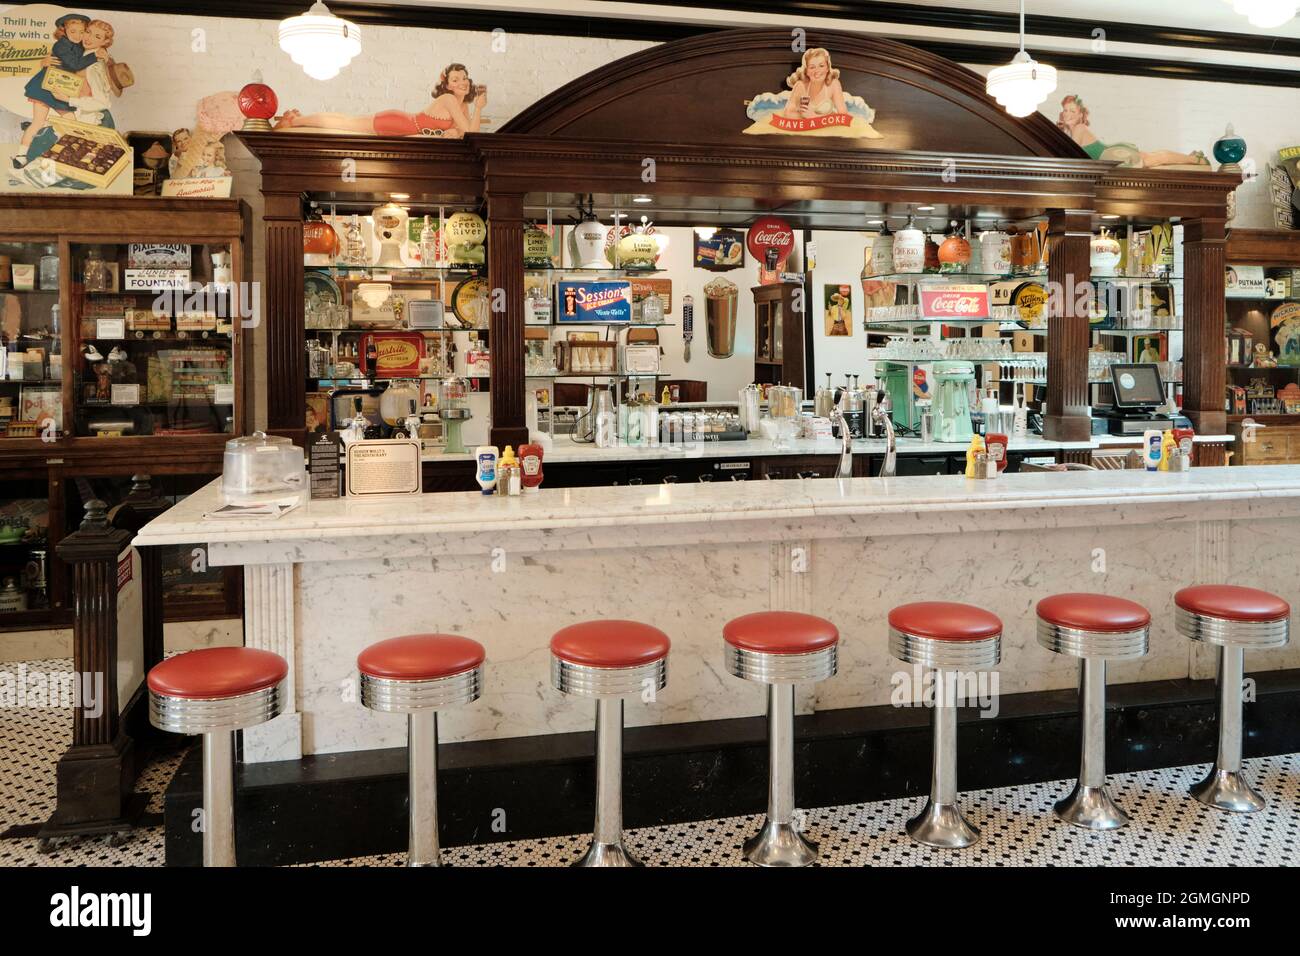 https://c8.alamy.com/comp/2GMGNPD/old-fashioned-drug-store-soda-fountain-counter-from-the-1950s-at-huggin-mollys-restaurant-in-abbeville-alabama-usa-2GMGNPD.jpg